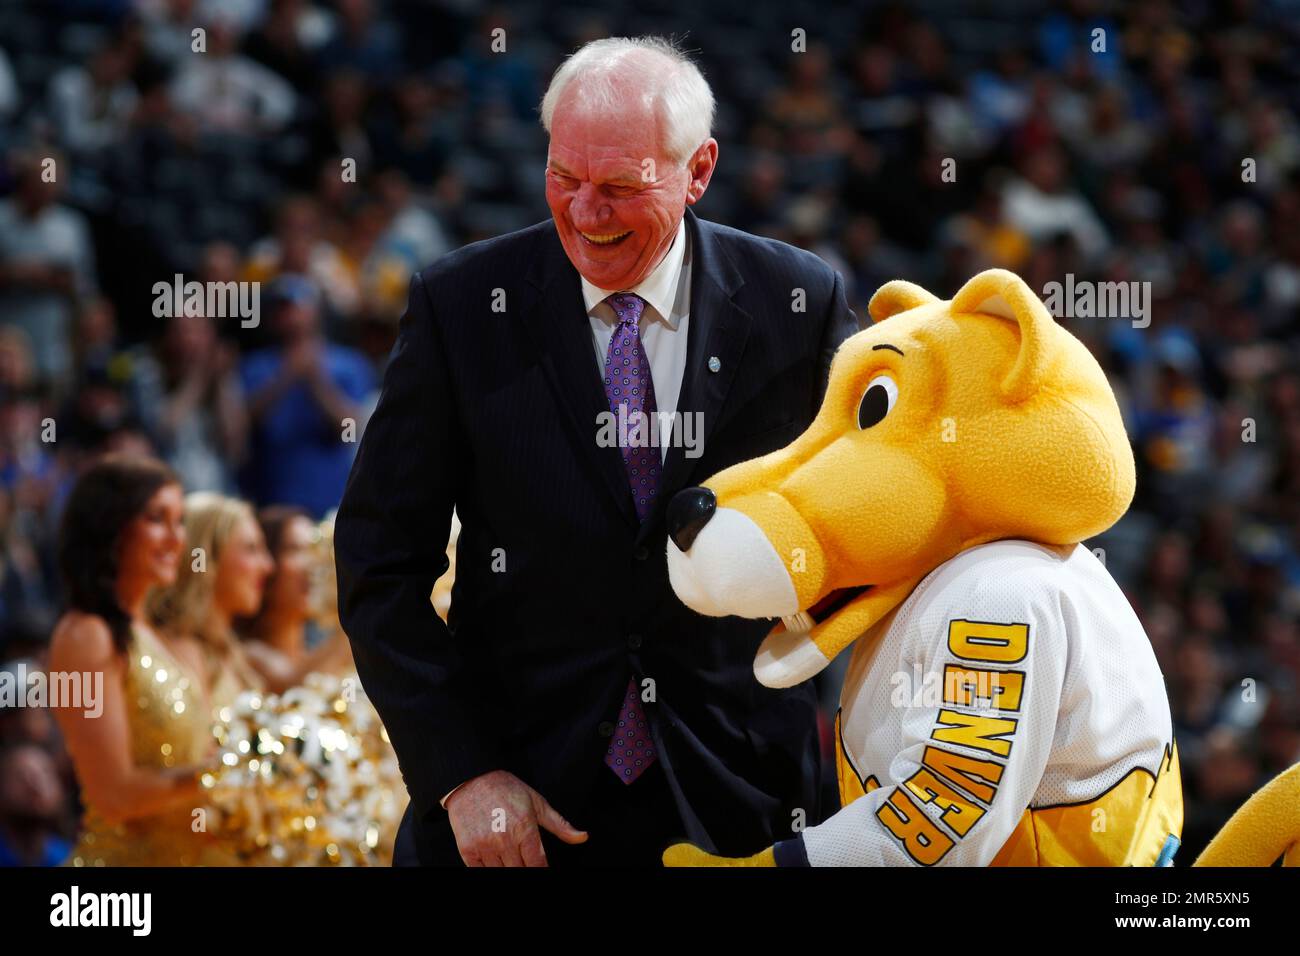 Retired Denver Nuggets center Dan Issel, left, his welcomed by team mascot Rocky the mountain lion during the team's 50th anniversary celebration before the second half of an NBA basketball game Saturday, Oct. 21, 2017, in Denver. The Nuggets won 96-79. (AP Photo/David Zalubowski) Stock Photo